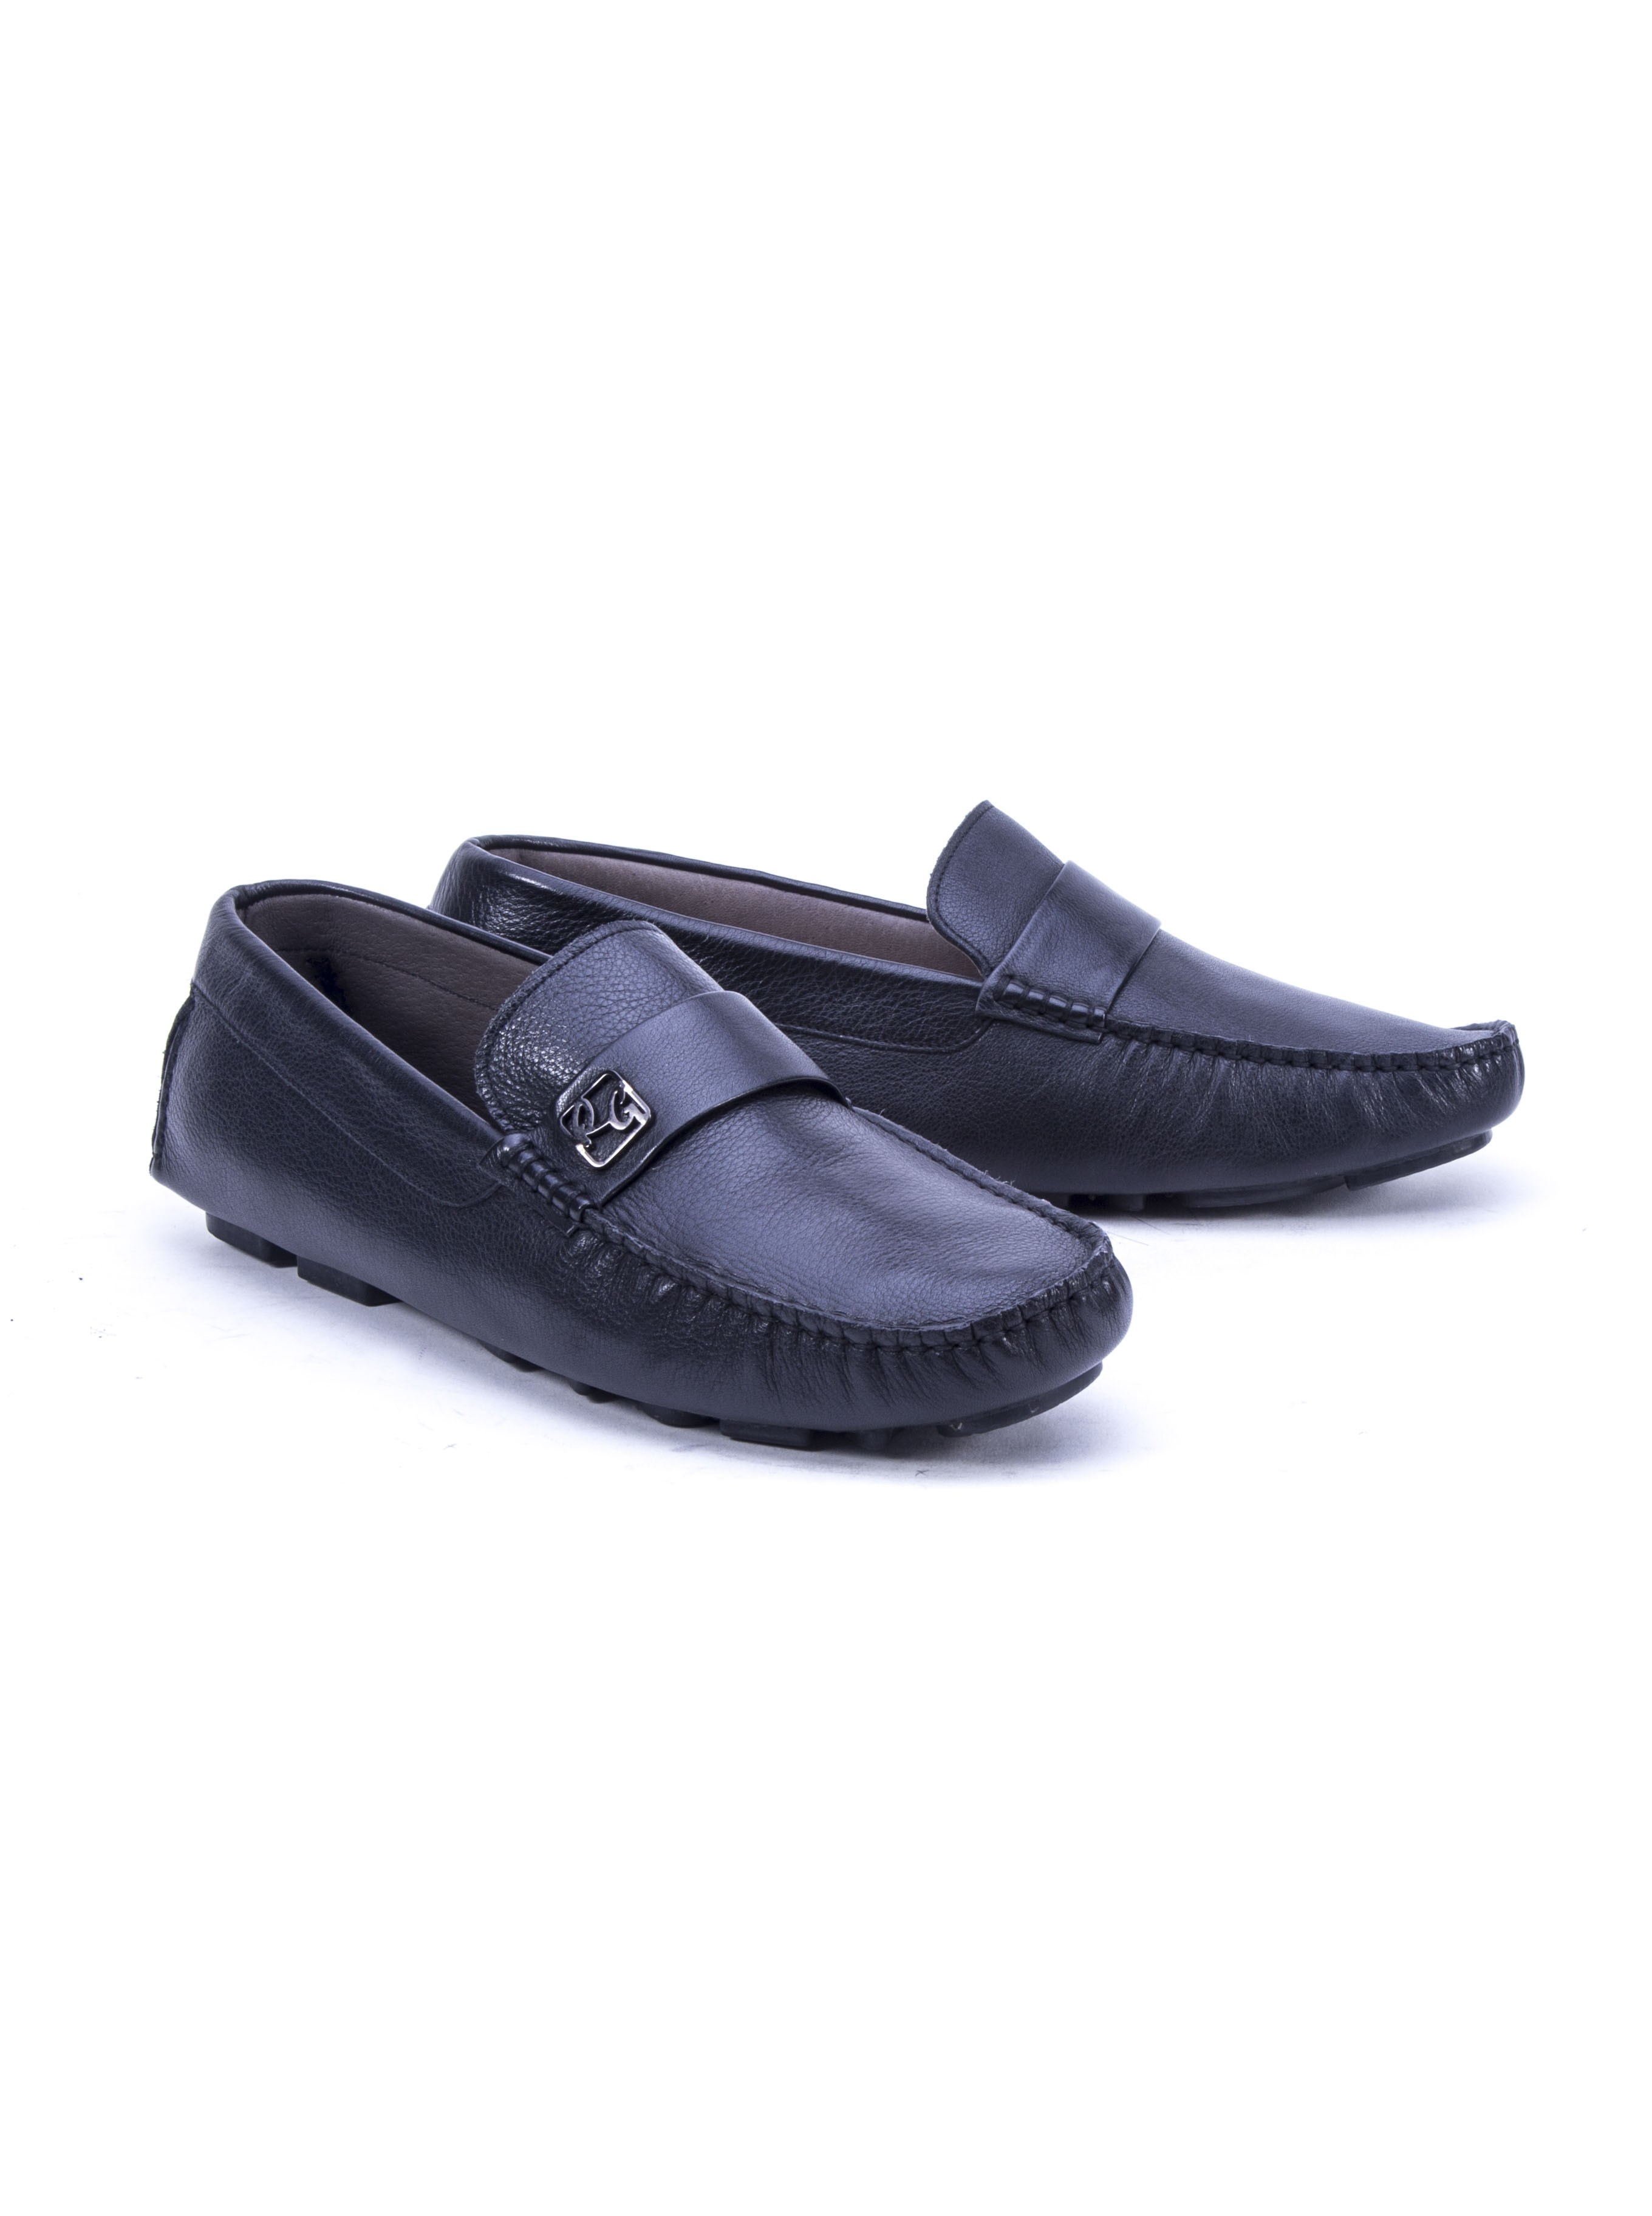 Robert Graham Grapewin Loafer At The Mister Shop Since 1948